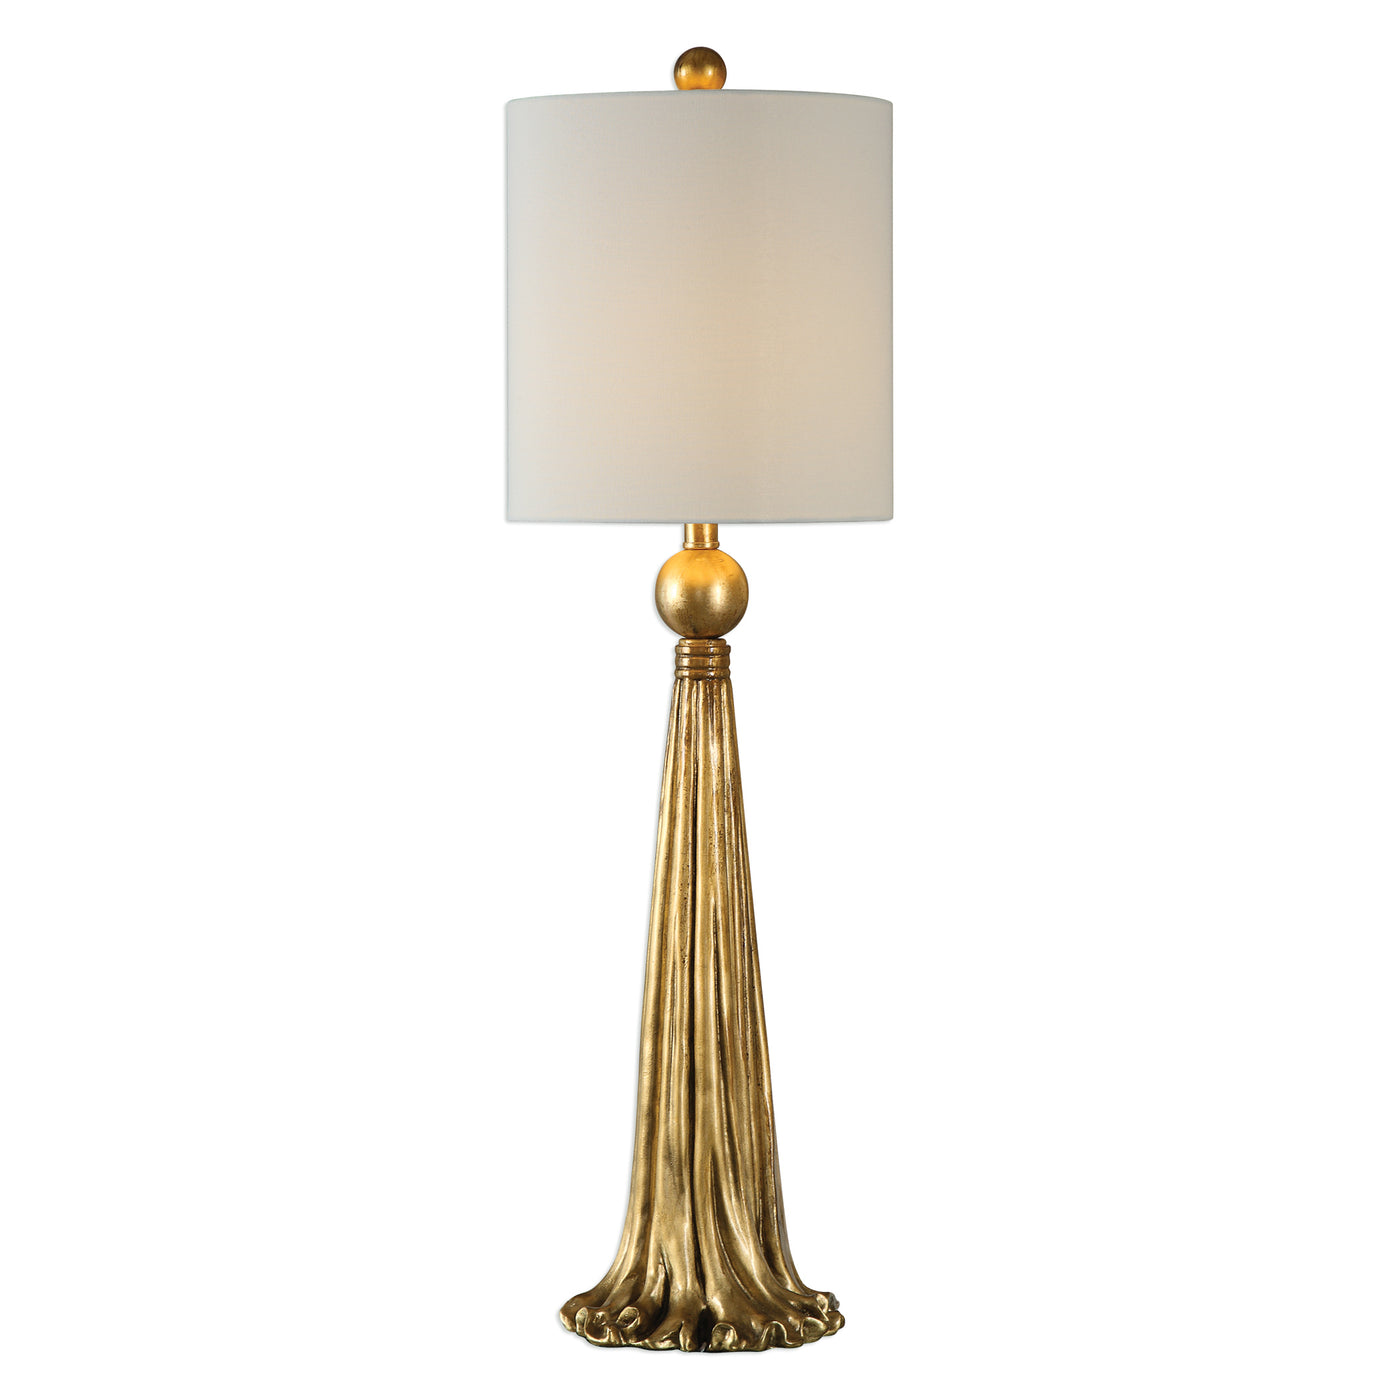 This Drapery Inspired Design Is Hand Finished In A Heavily Antiqued Metallic Gold. The Round Hardback Drum Shade Is A Whit...